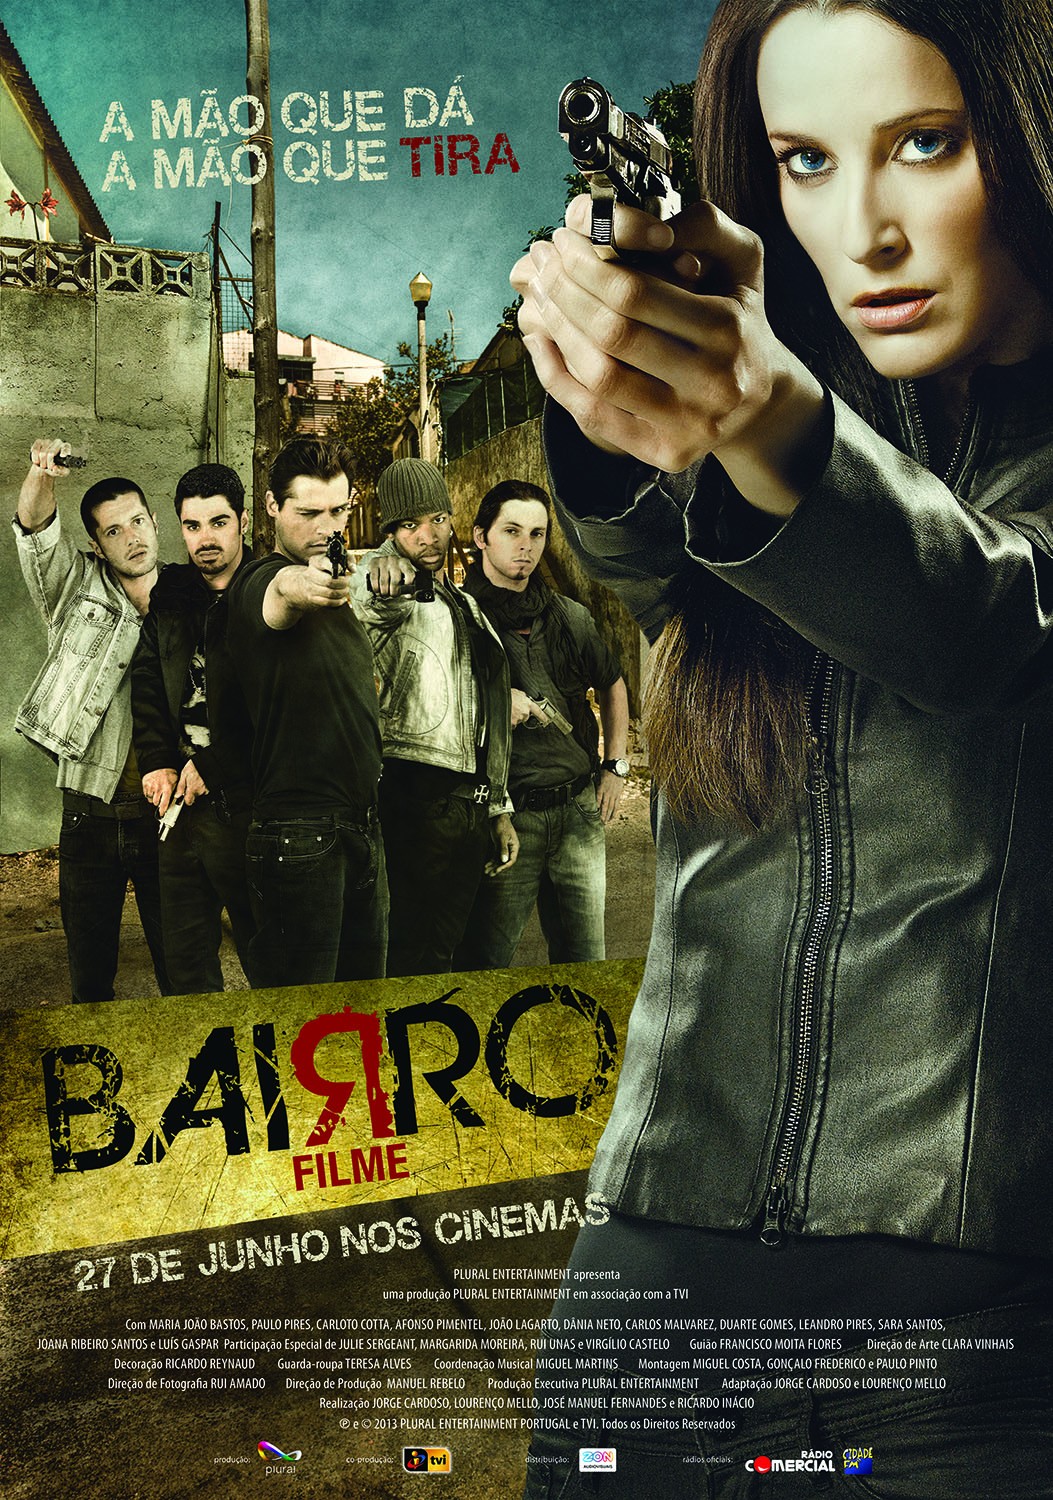 Extra Large Movie Poster Image for Bairro 